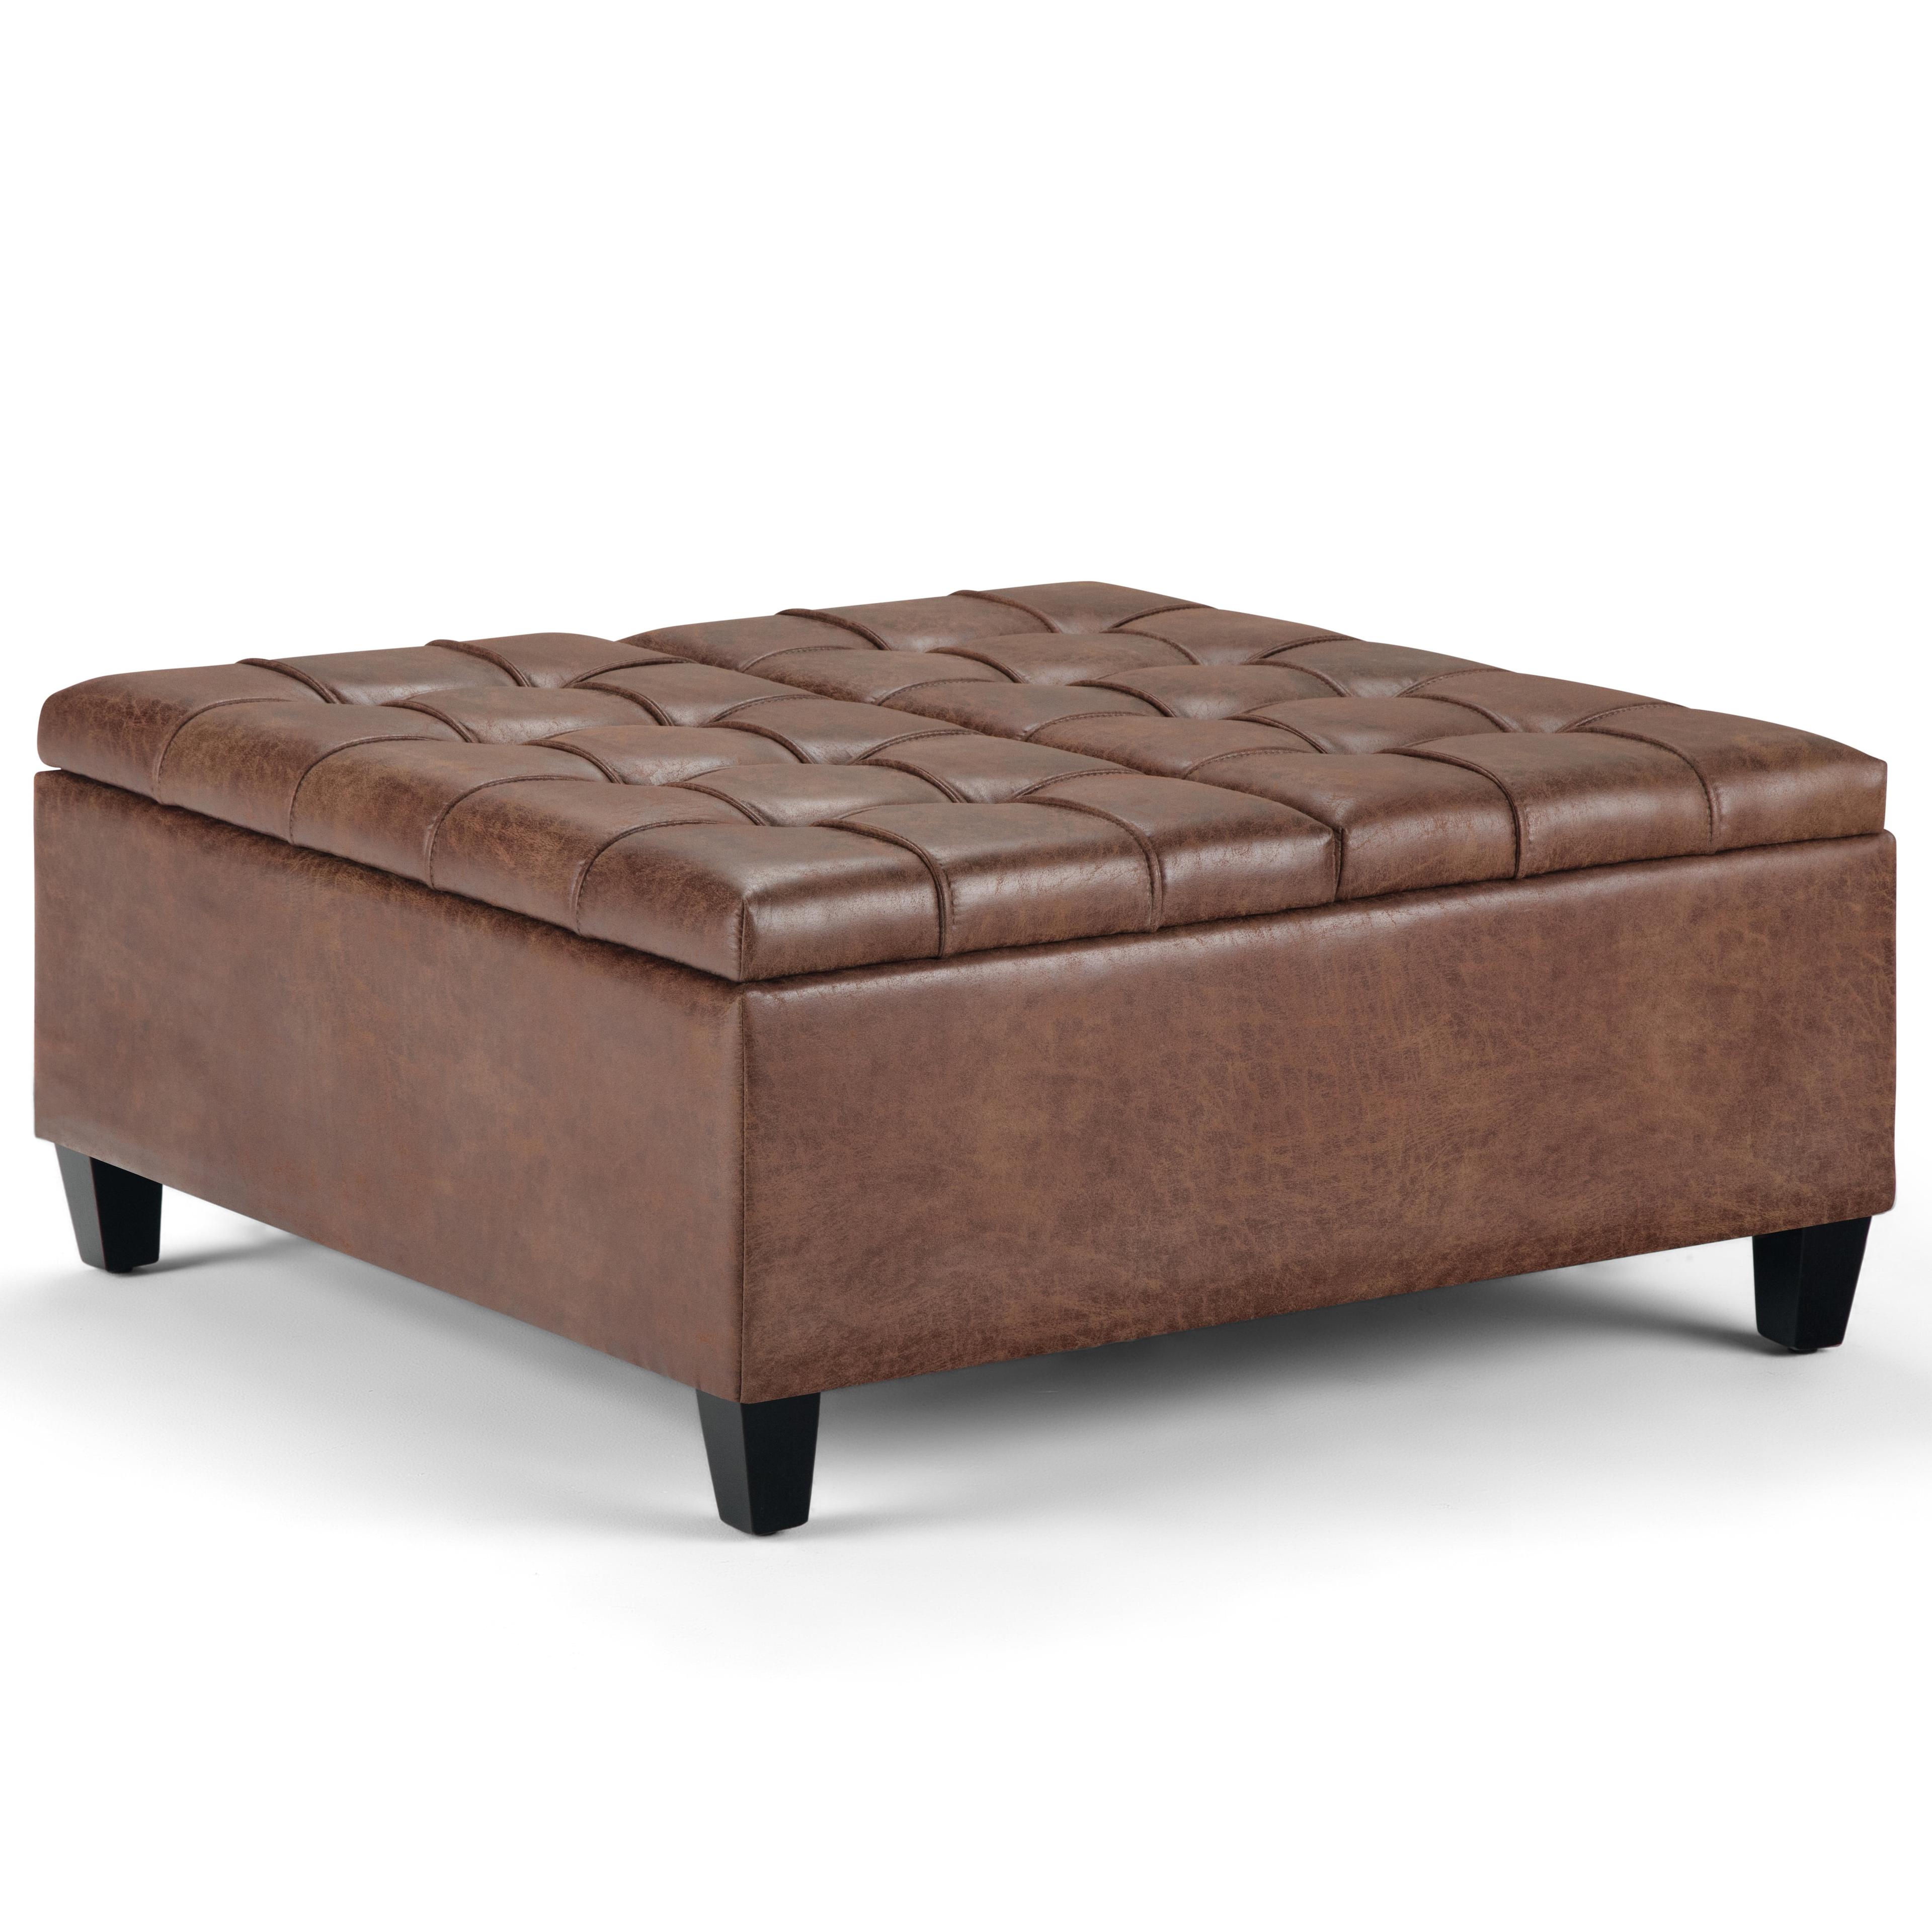 Harrison Distressed Umber Brown Faux Leather Tufted Cocktail Ottoman